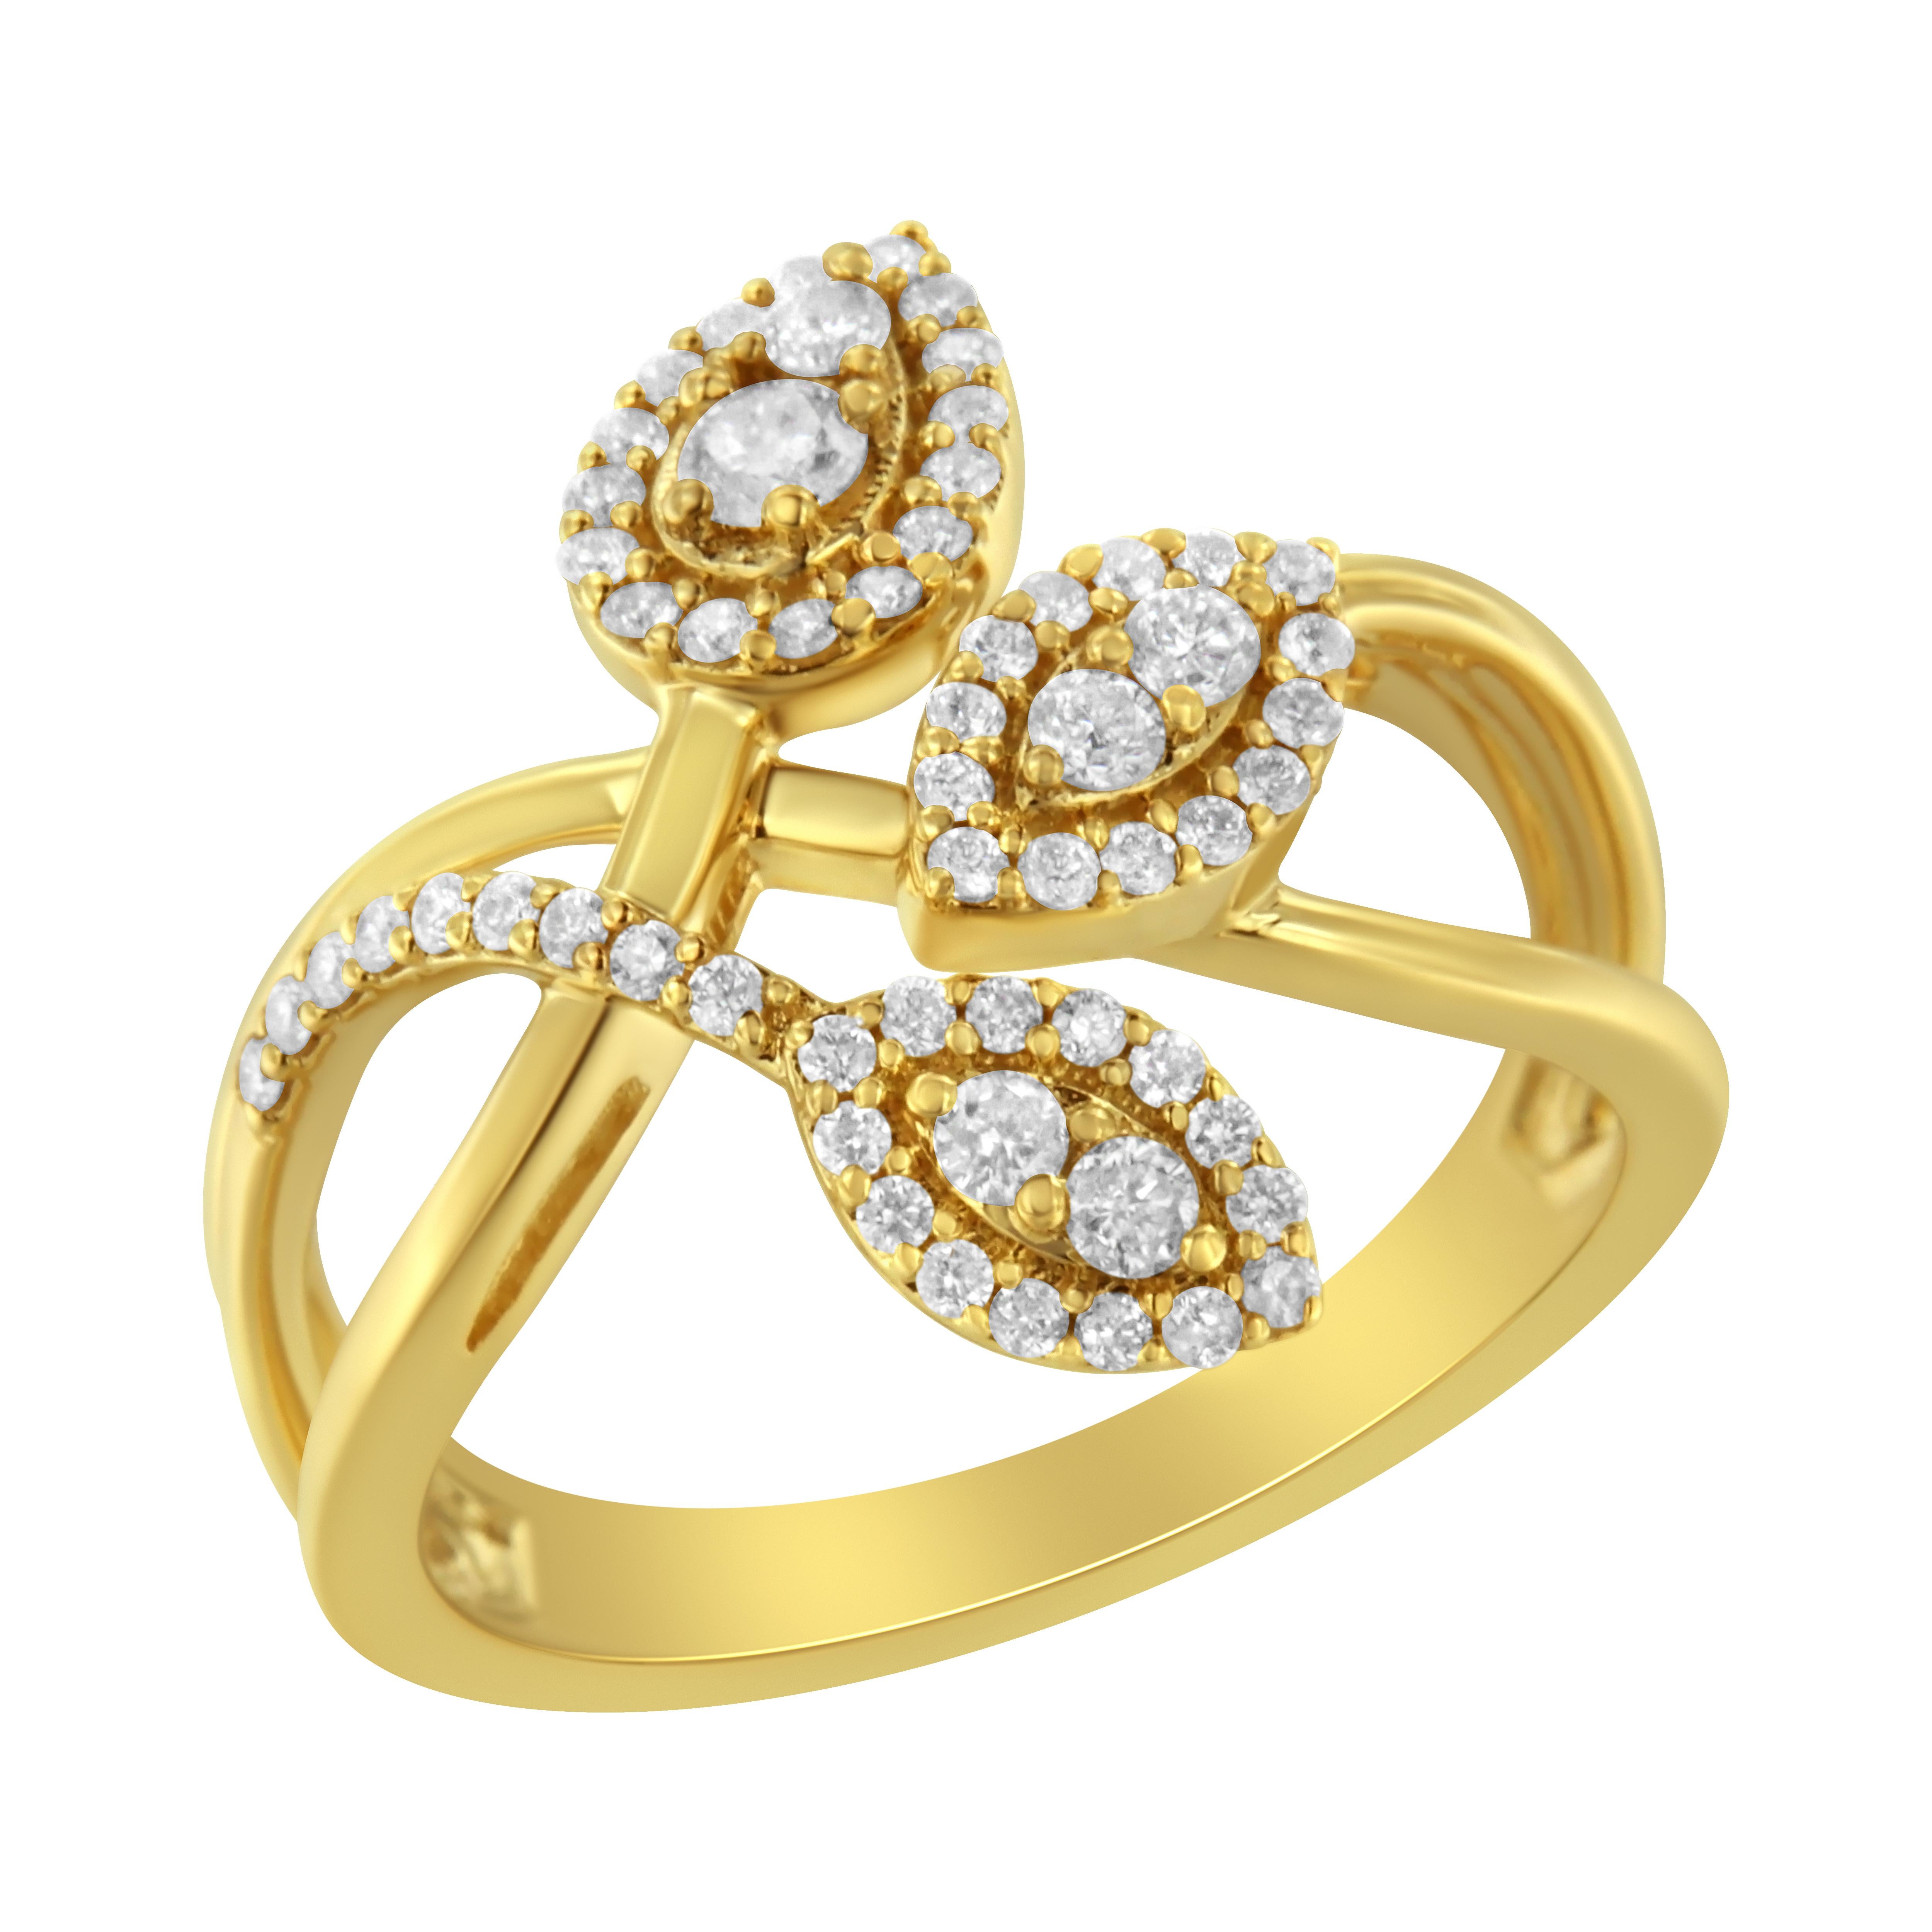 Complement your outfit with this beautiful leaf ring design. Created in 10k yellow gold, this ring features 1/2ct TDW of diamonds. A layered split ring band holds three round cut diamond studded leaves that will add extra sparkle to your